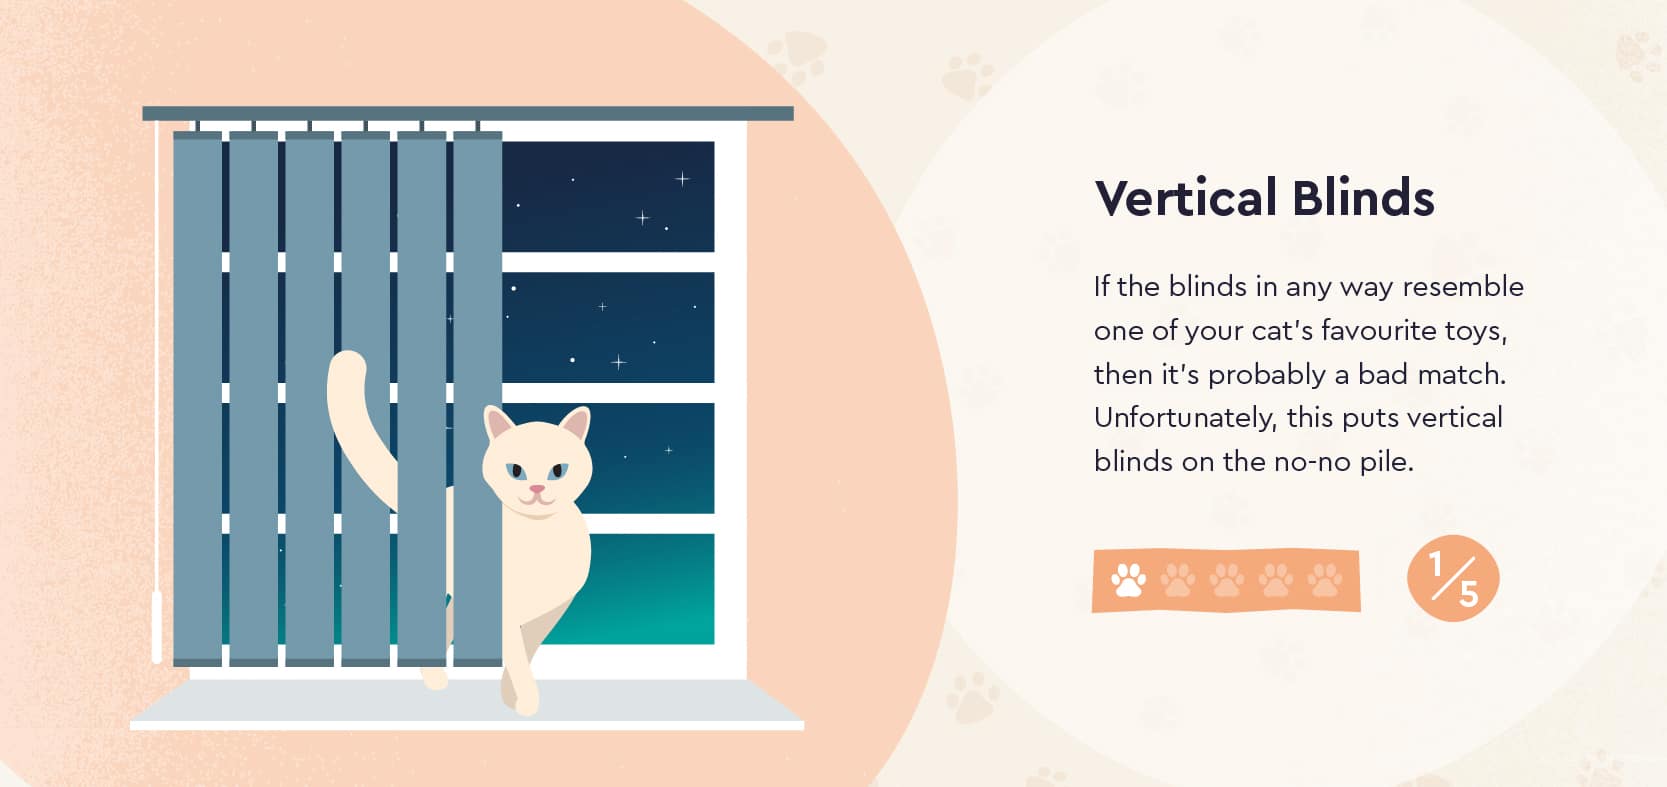 Vertical Blinds not a safe option for cat owners